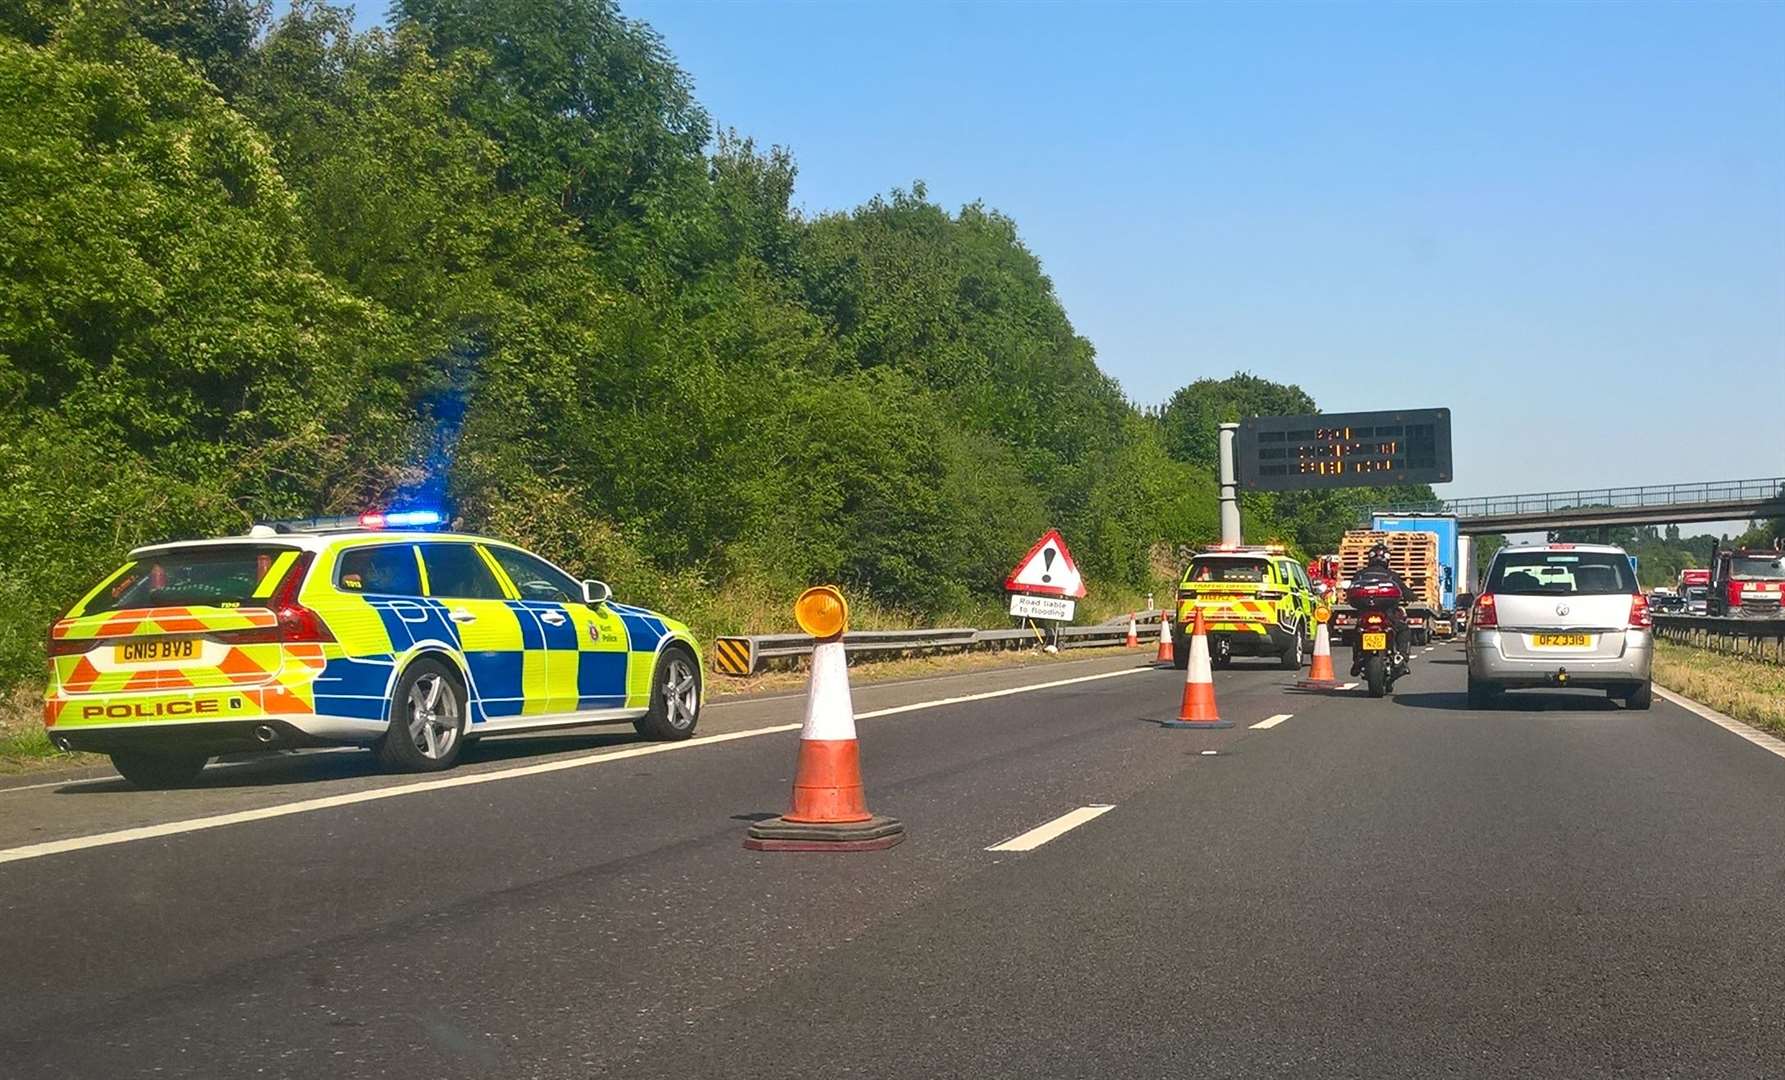 One lane is closed on the M2 coastbound